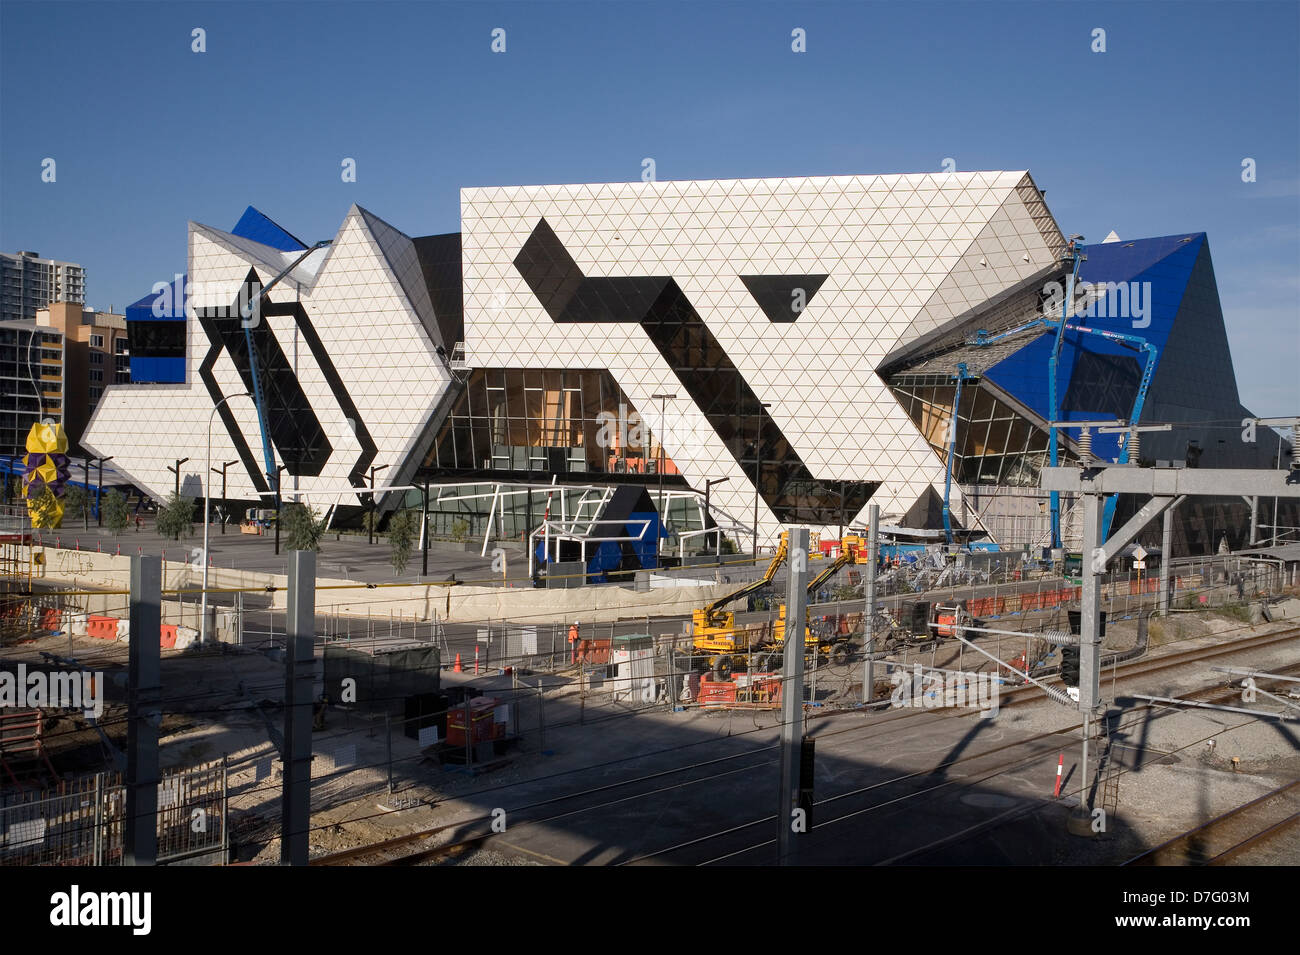 The Perth Entertainment Center in the final stages of construction, March 2013. Western Australia. Stock Photo